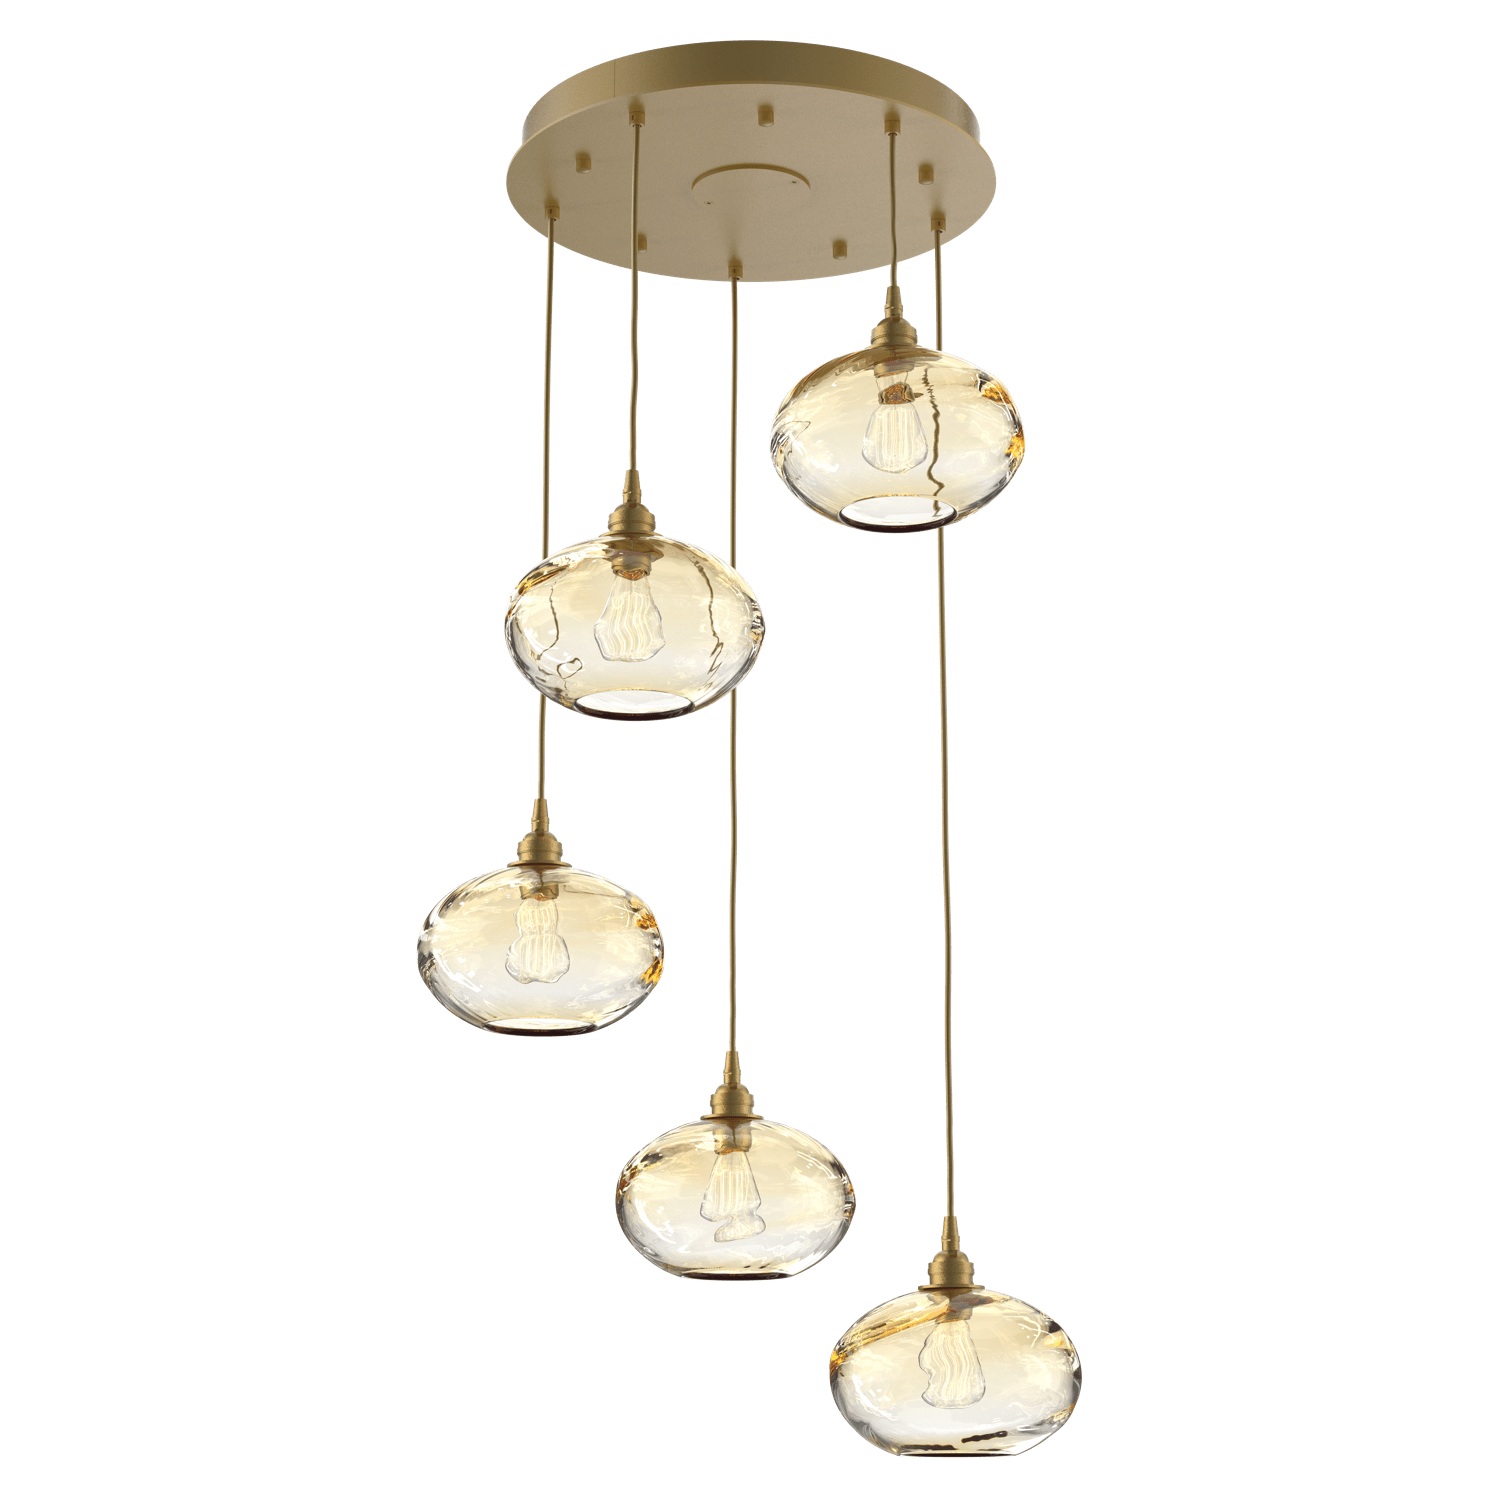 CHB0036-05-GB-OA-Hammerton-Studio-Optic-Blown-Glass-Coppa-5-light-round-pendant-chandelier-with-gilded-brass-finish-and-optic-amber-blown-glass-shades-and-incandescent-lamping